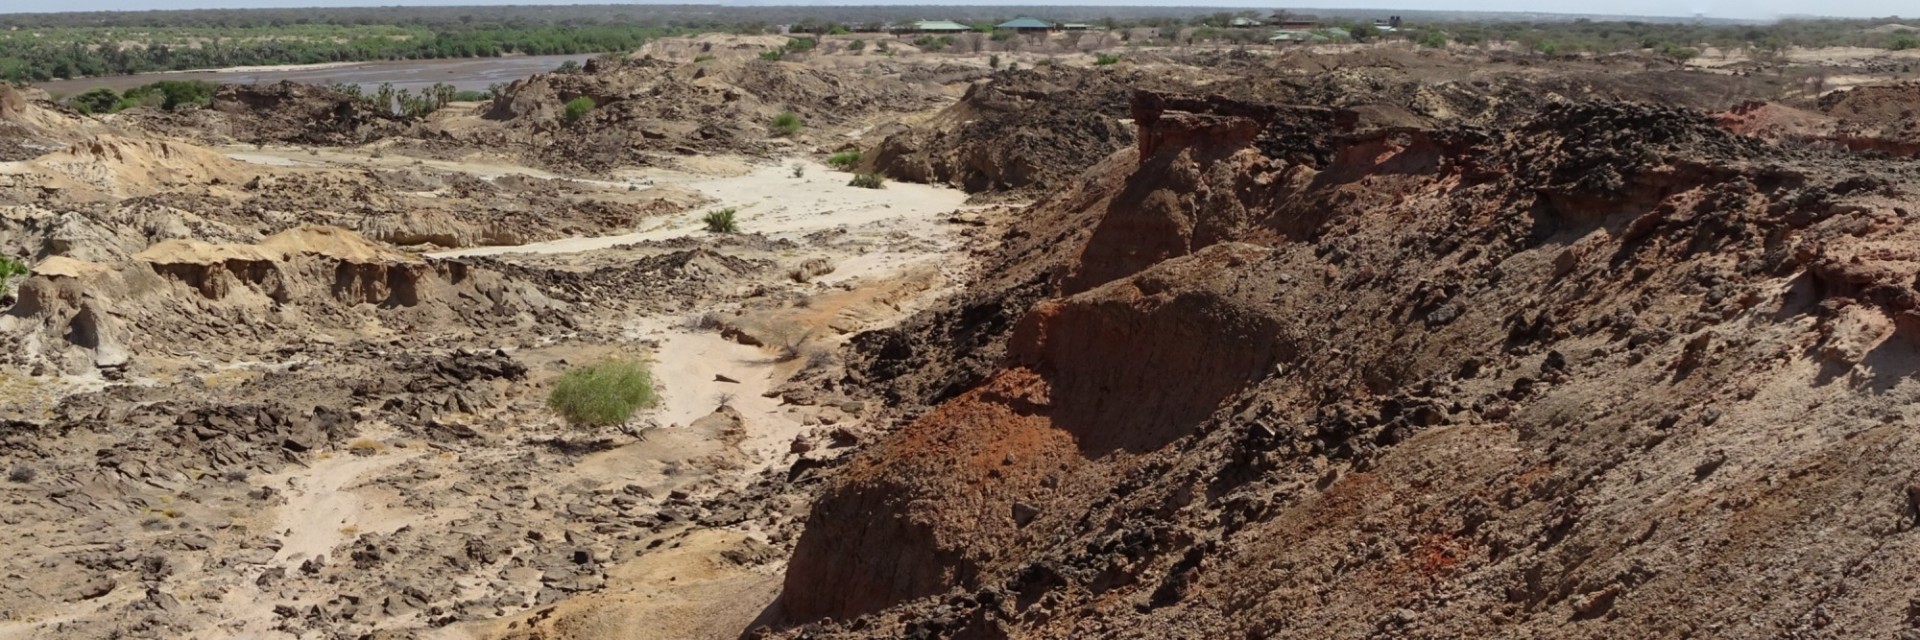 A boundary between red and white sediments in the area around the Turkana Basin Institute